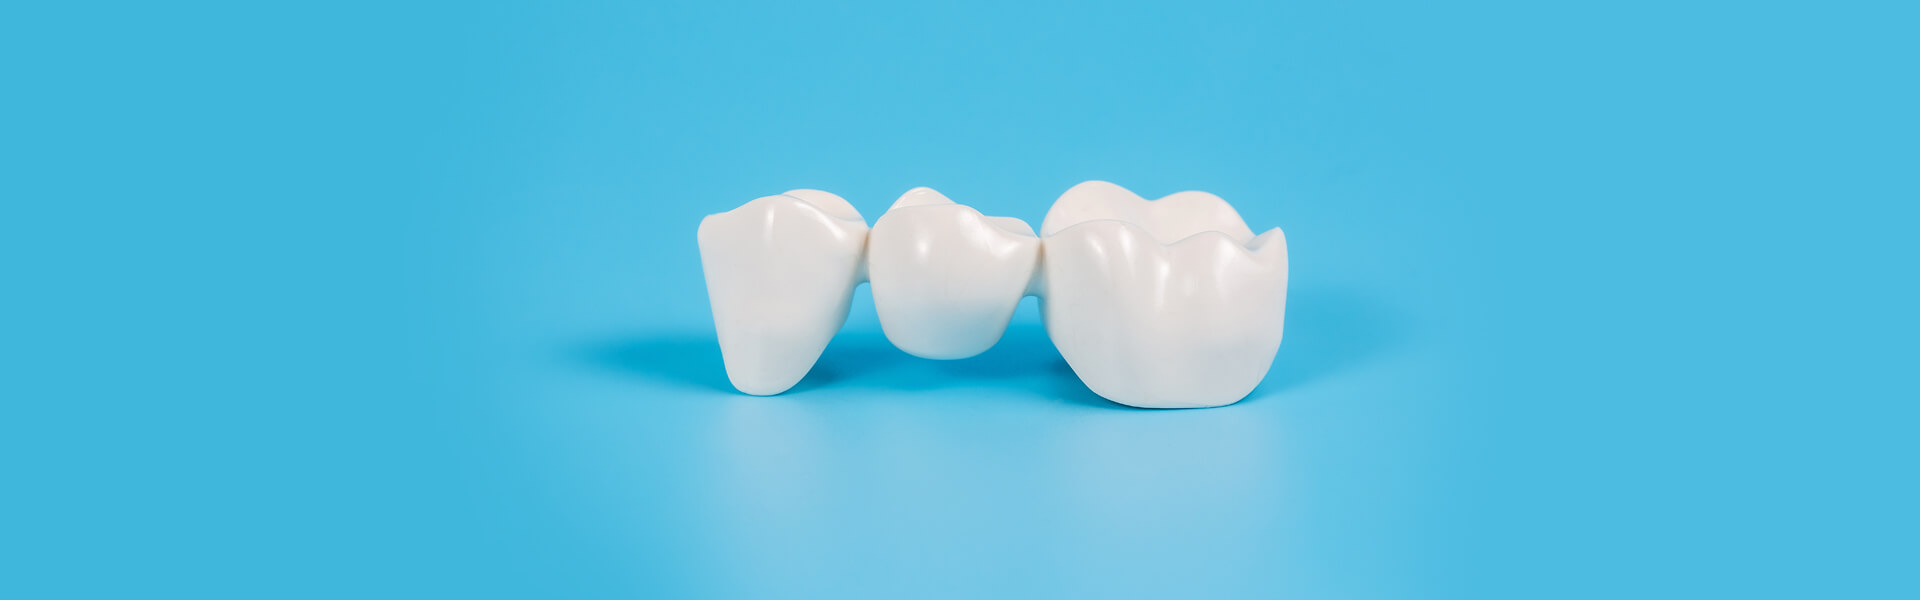 All You Need to Know About Dental Bridges Procedure